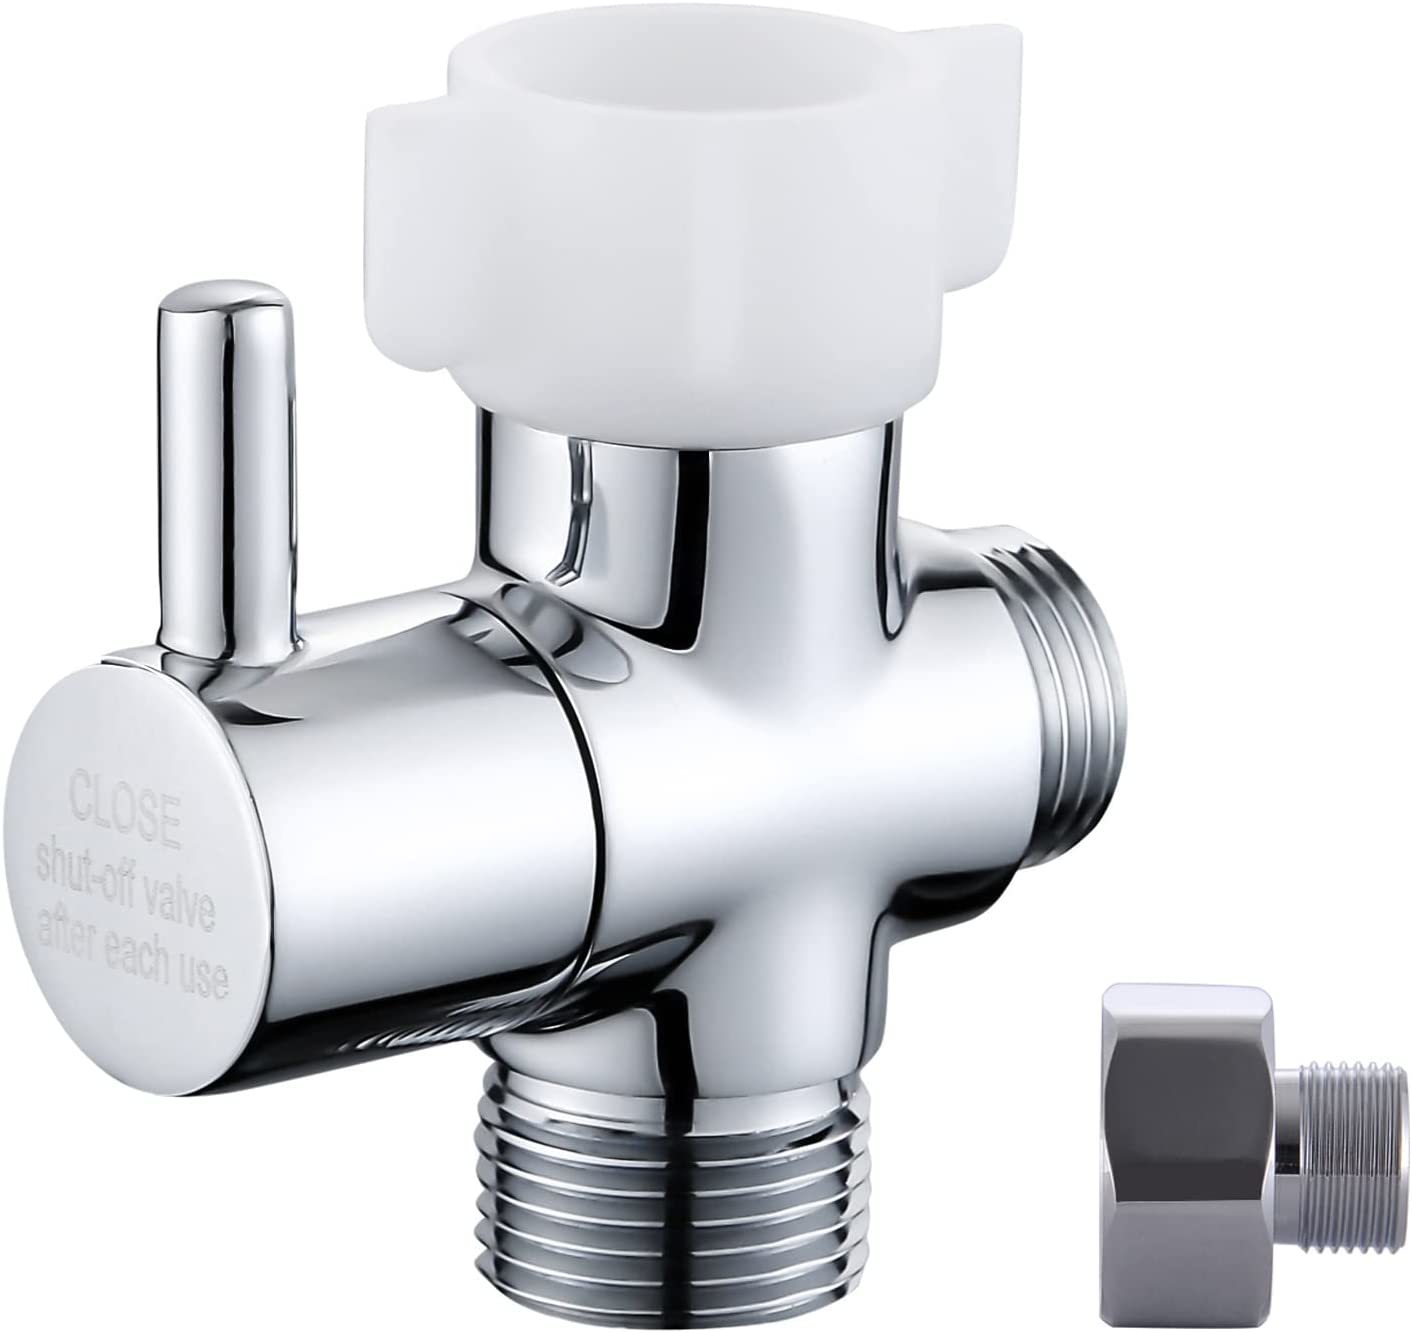 Primary image for Three-Way Metal Brass T-Adapter With Shut-Off Valve For Handheld Toilet Bidet